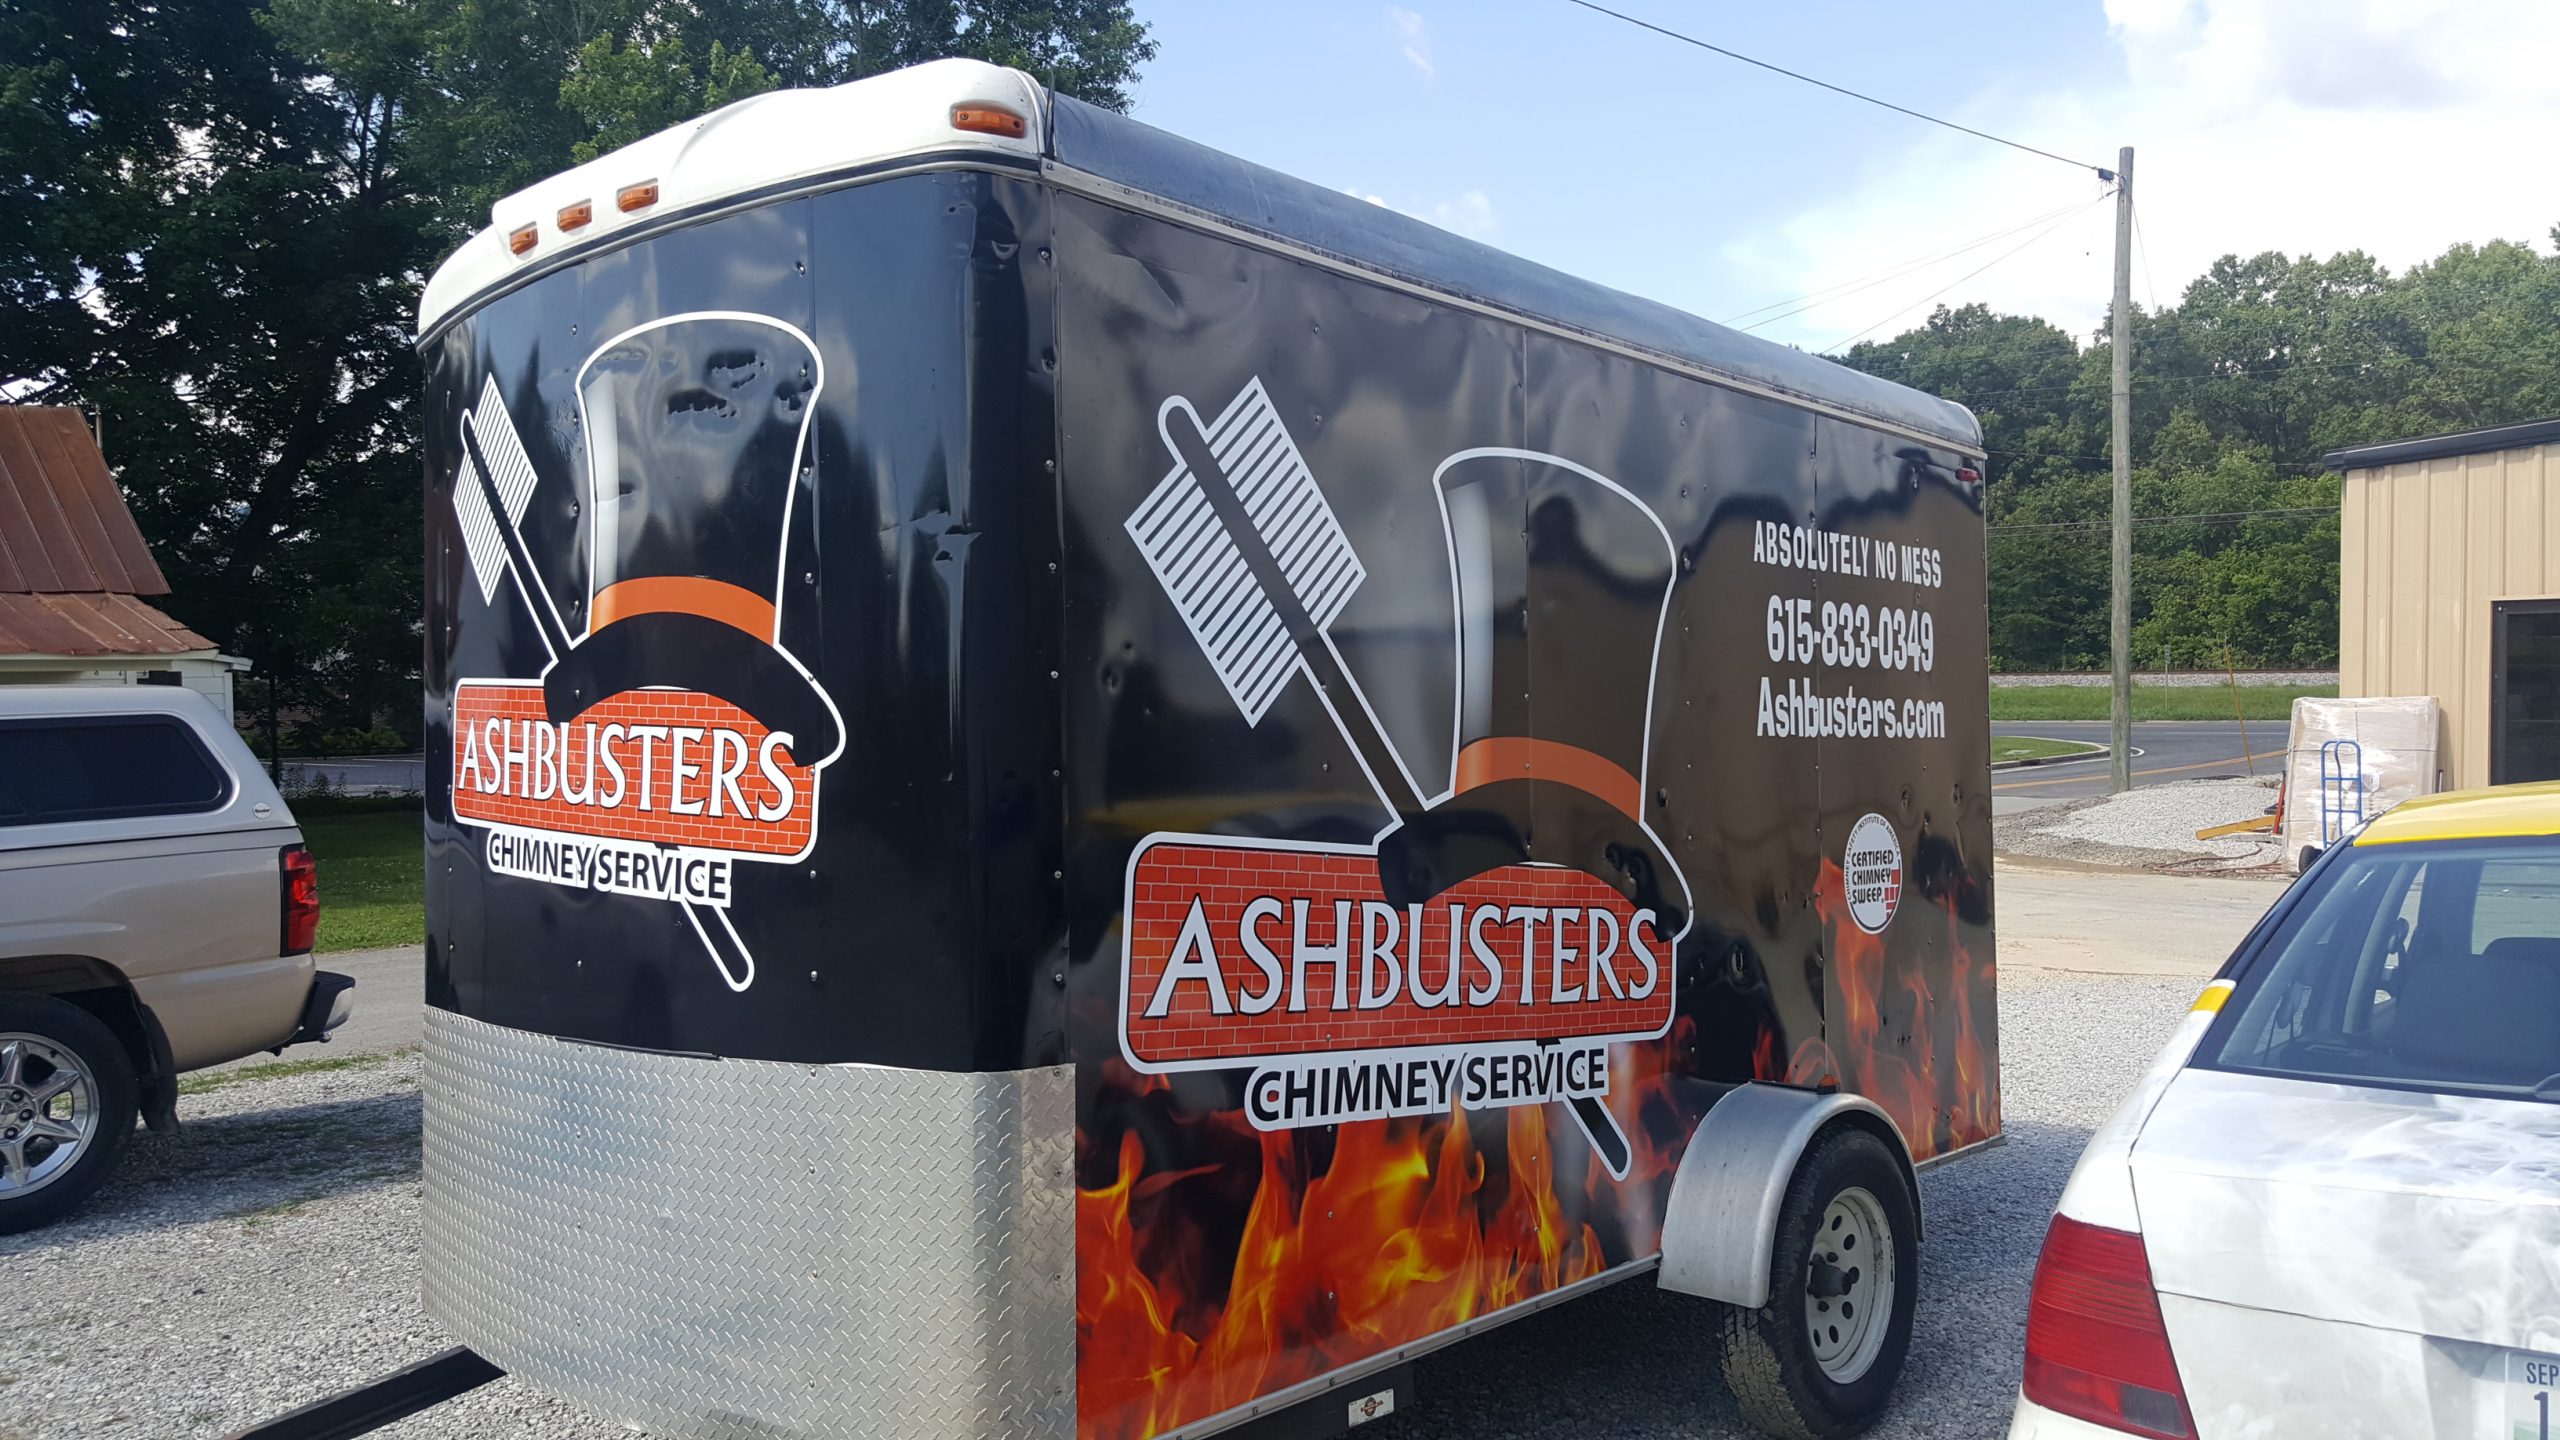 Ashbusters logo on side of trailer